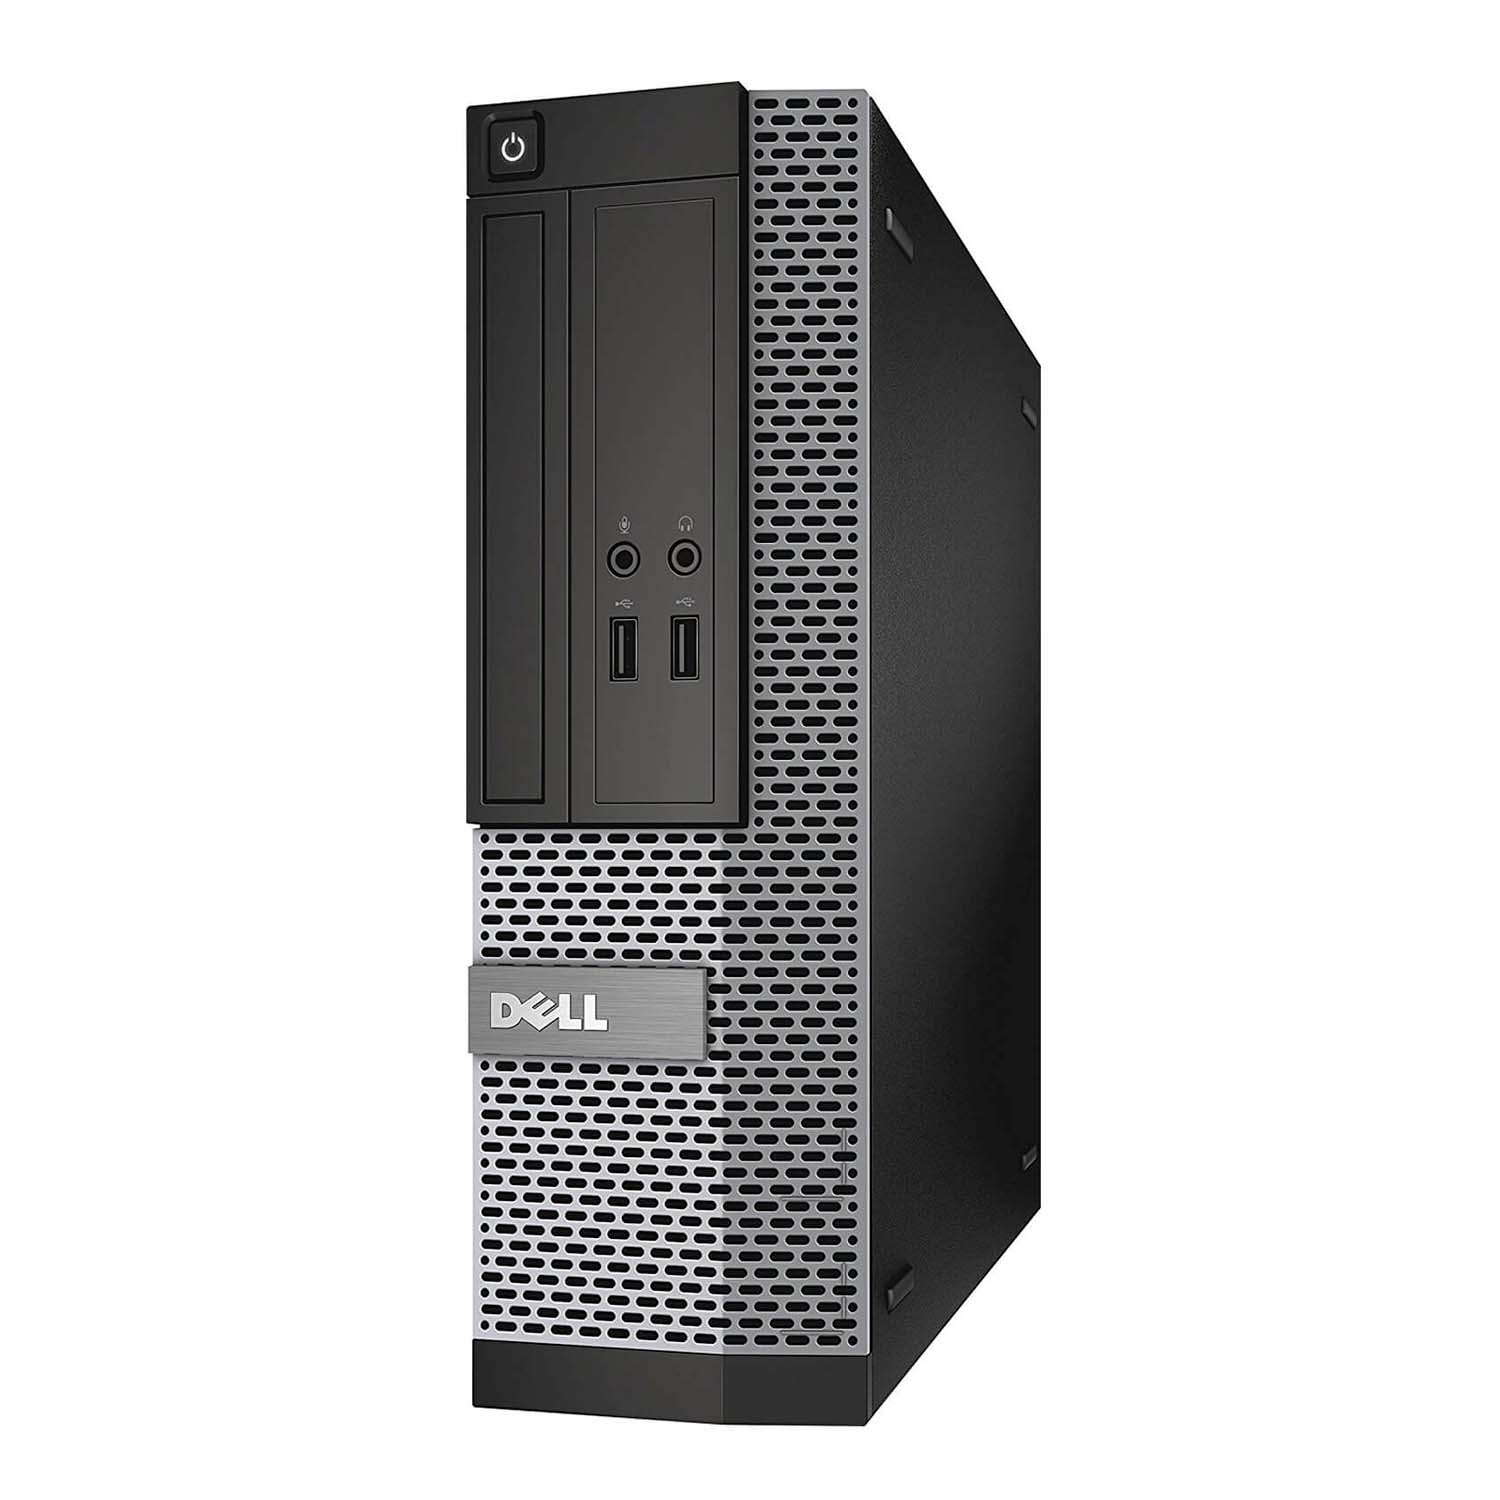 Dell Optiplex 3010 Desktop Computer Intel Core i5 3470 8GB RAM 500GB SSD Windows 10 Home PC, New Free keyboard and Mouse, WiFi Adapter, Black - image 1 of 6